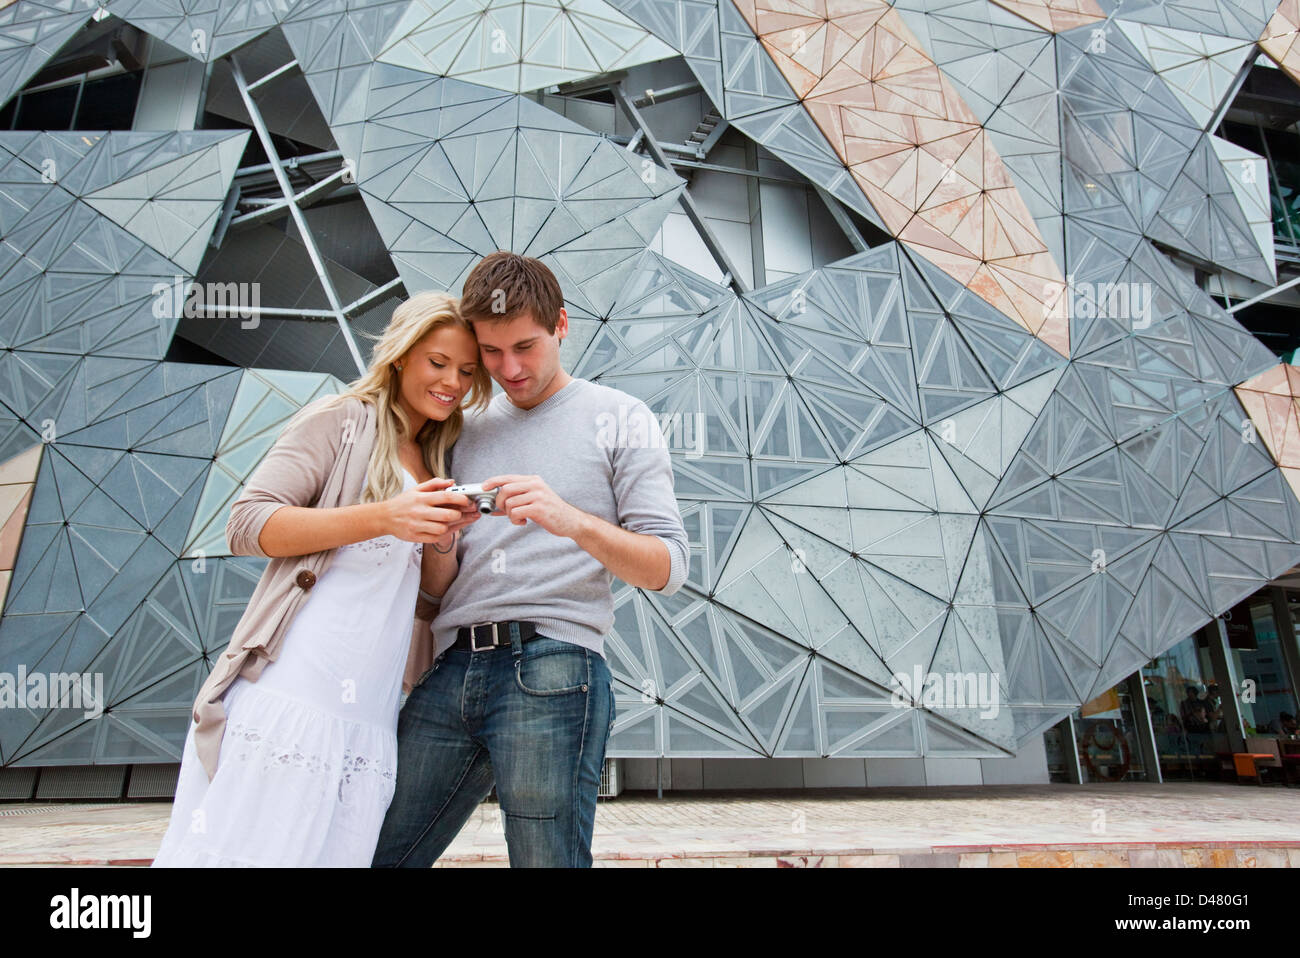 Young couple sightseeing in city, looking at photos on camera. Federation Square, Melbourne, Victoria, Australia Stock Photo